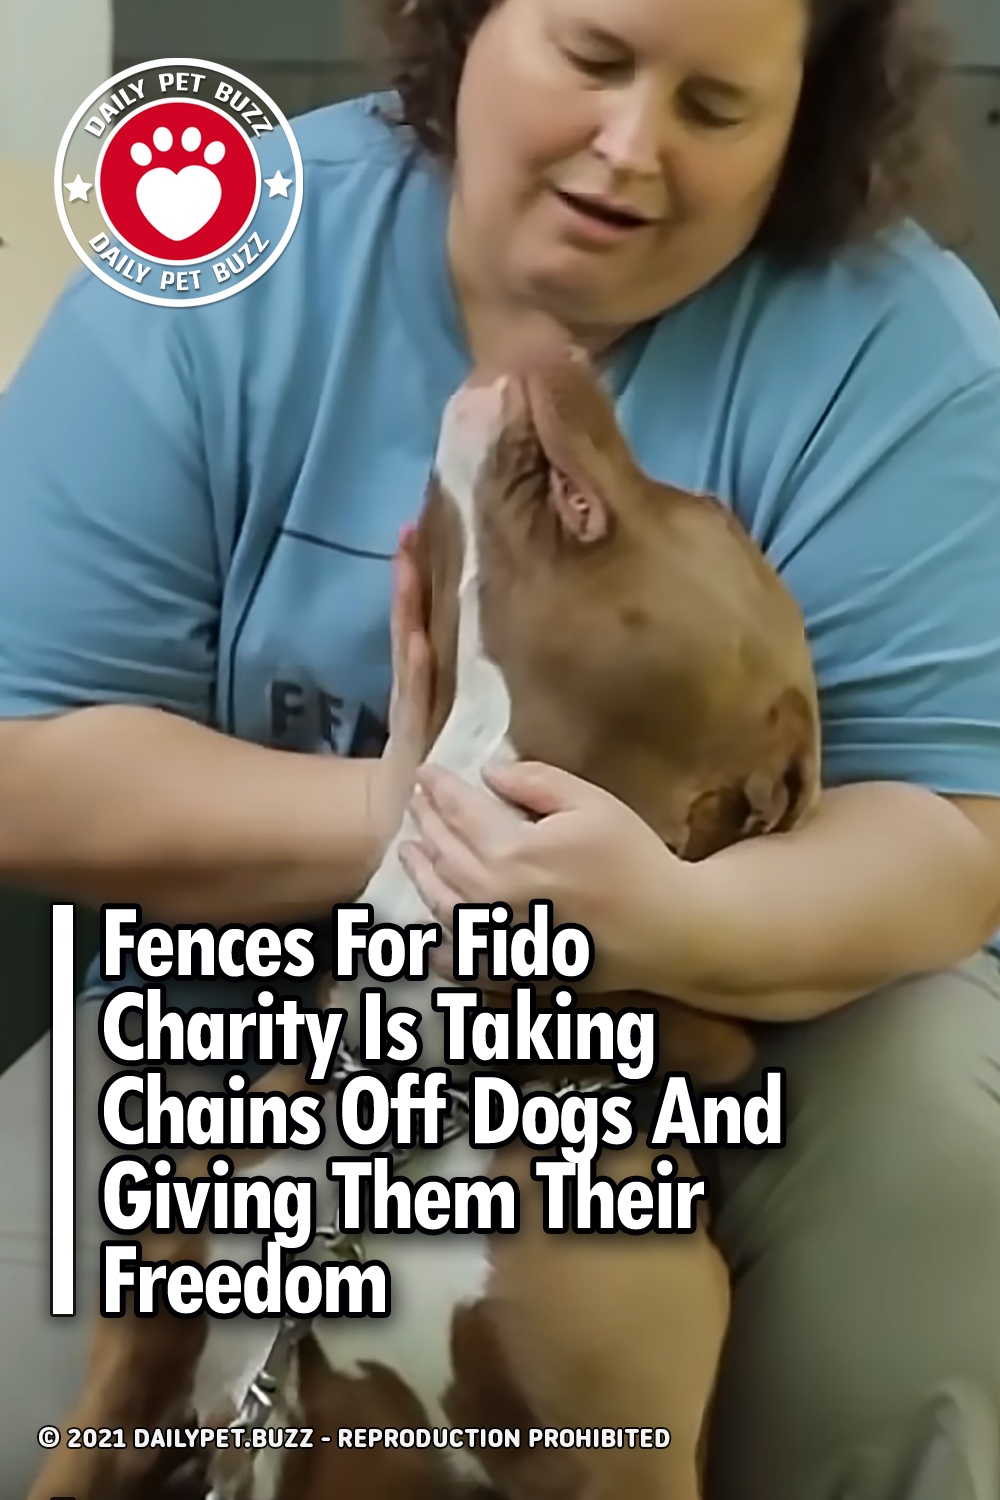 Fences For Fido Charity Is Taking Chains Off Dogs And Giving Them Their Freedom